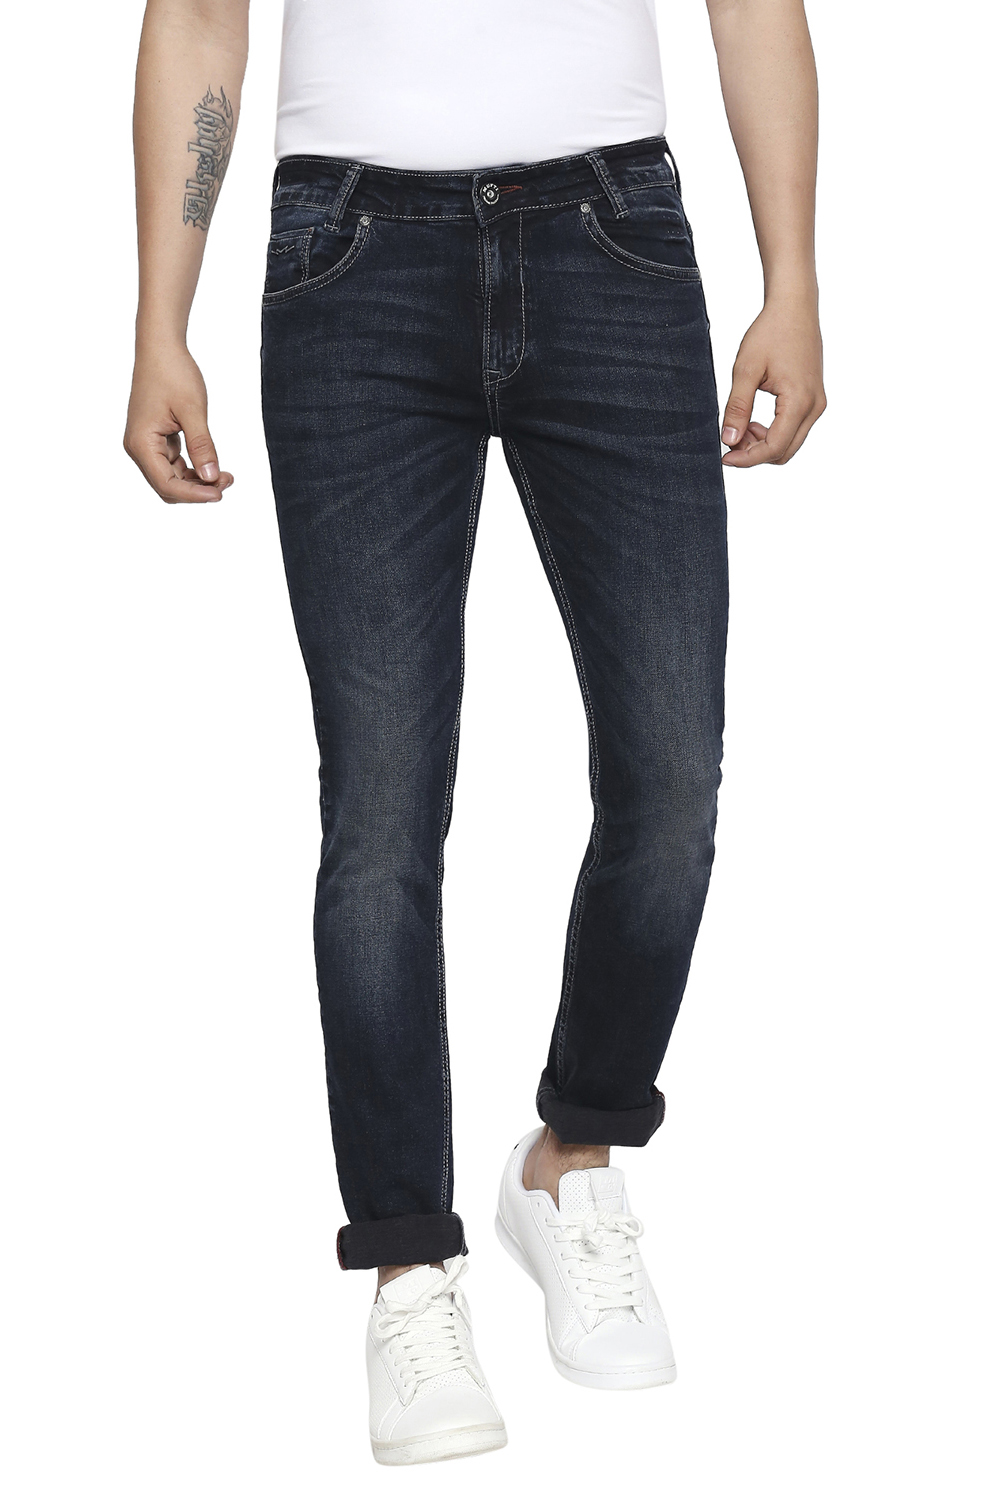 How To Choose The Perfect Stretch Jeans For Men?